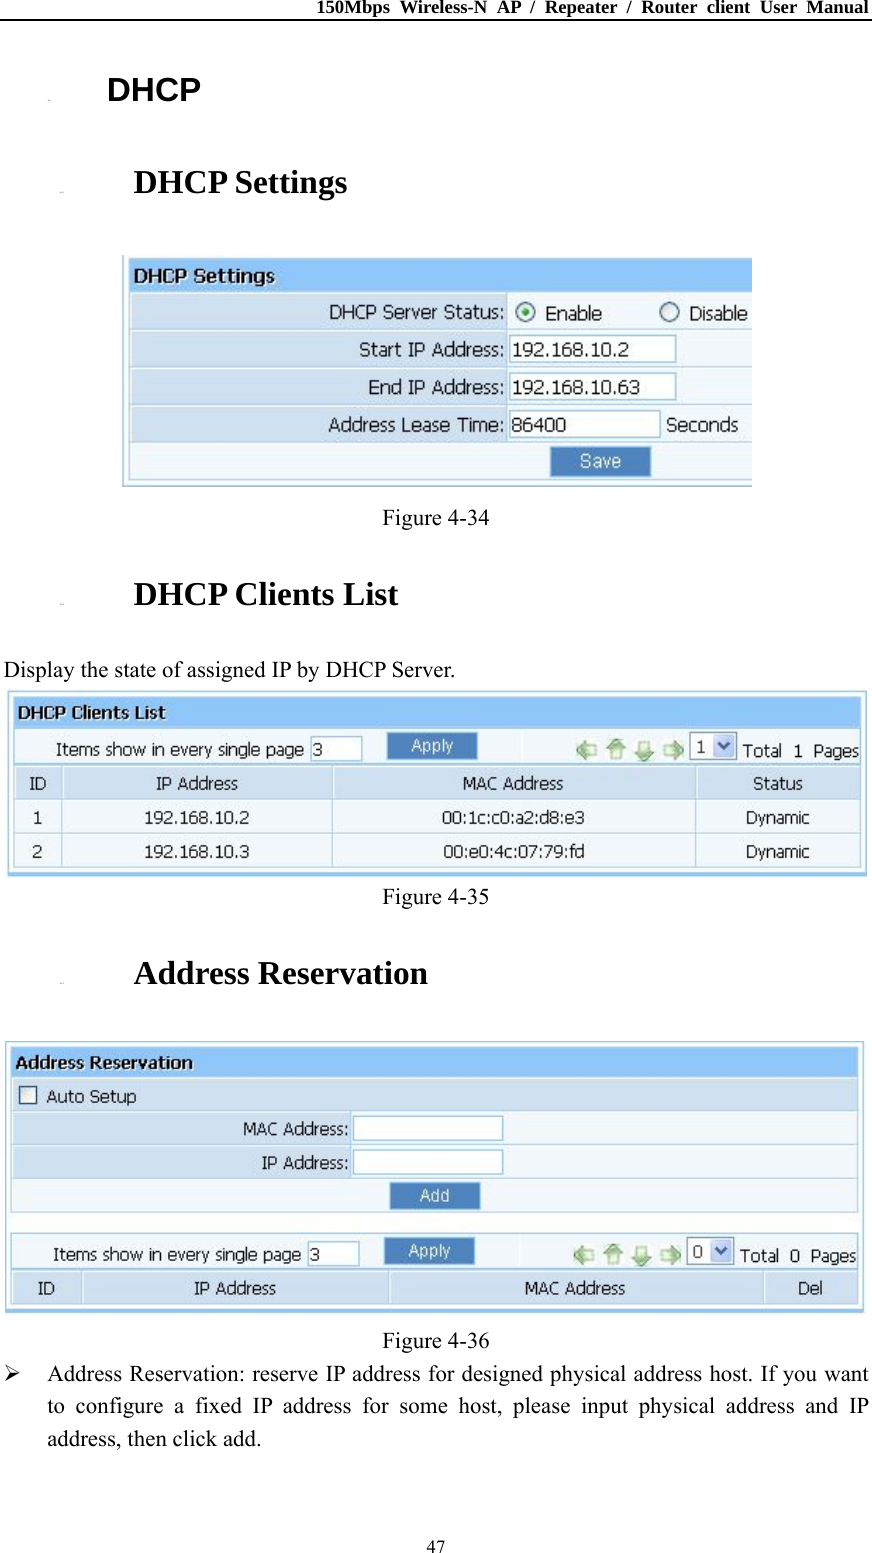 150Mbps Wireless-N AP / Repeater / Router client User Manual  474.6. DHCP 4.6.1. DHCP Settings  Figure 4-34 4.6.2. DHCP Clients List Display the state of assigned IP by DHCP Server.  Figure 4-35 4.6.3. Address Reservation  Figure 4-36  Address Reservation: reserve IP address for designed physical address host. If you want to configure a fixed IP address for some host, please input physical address and IP address, then click add. 